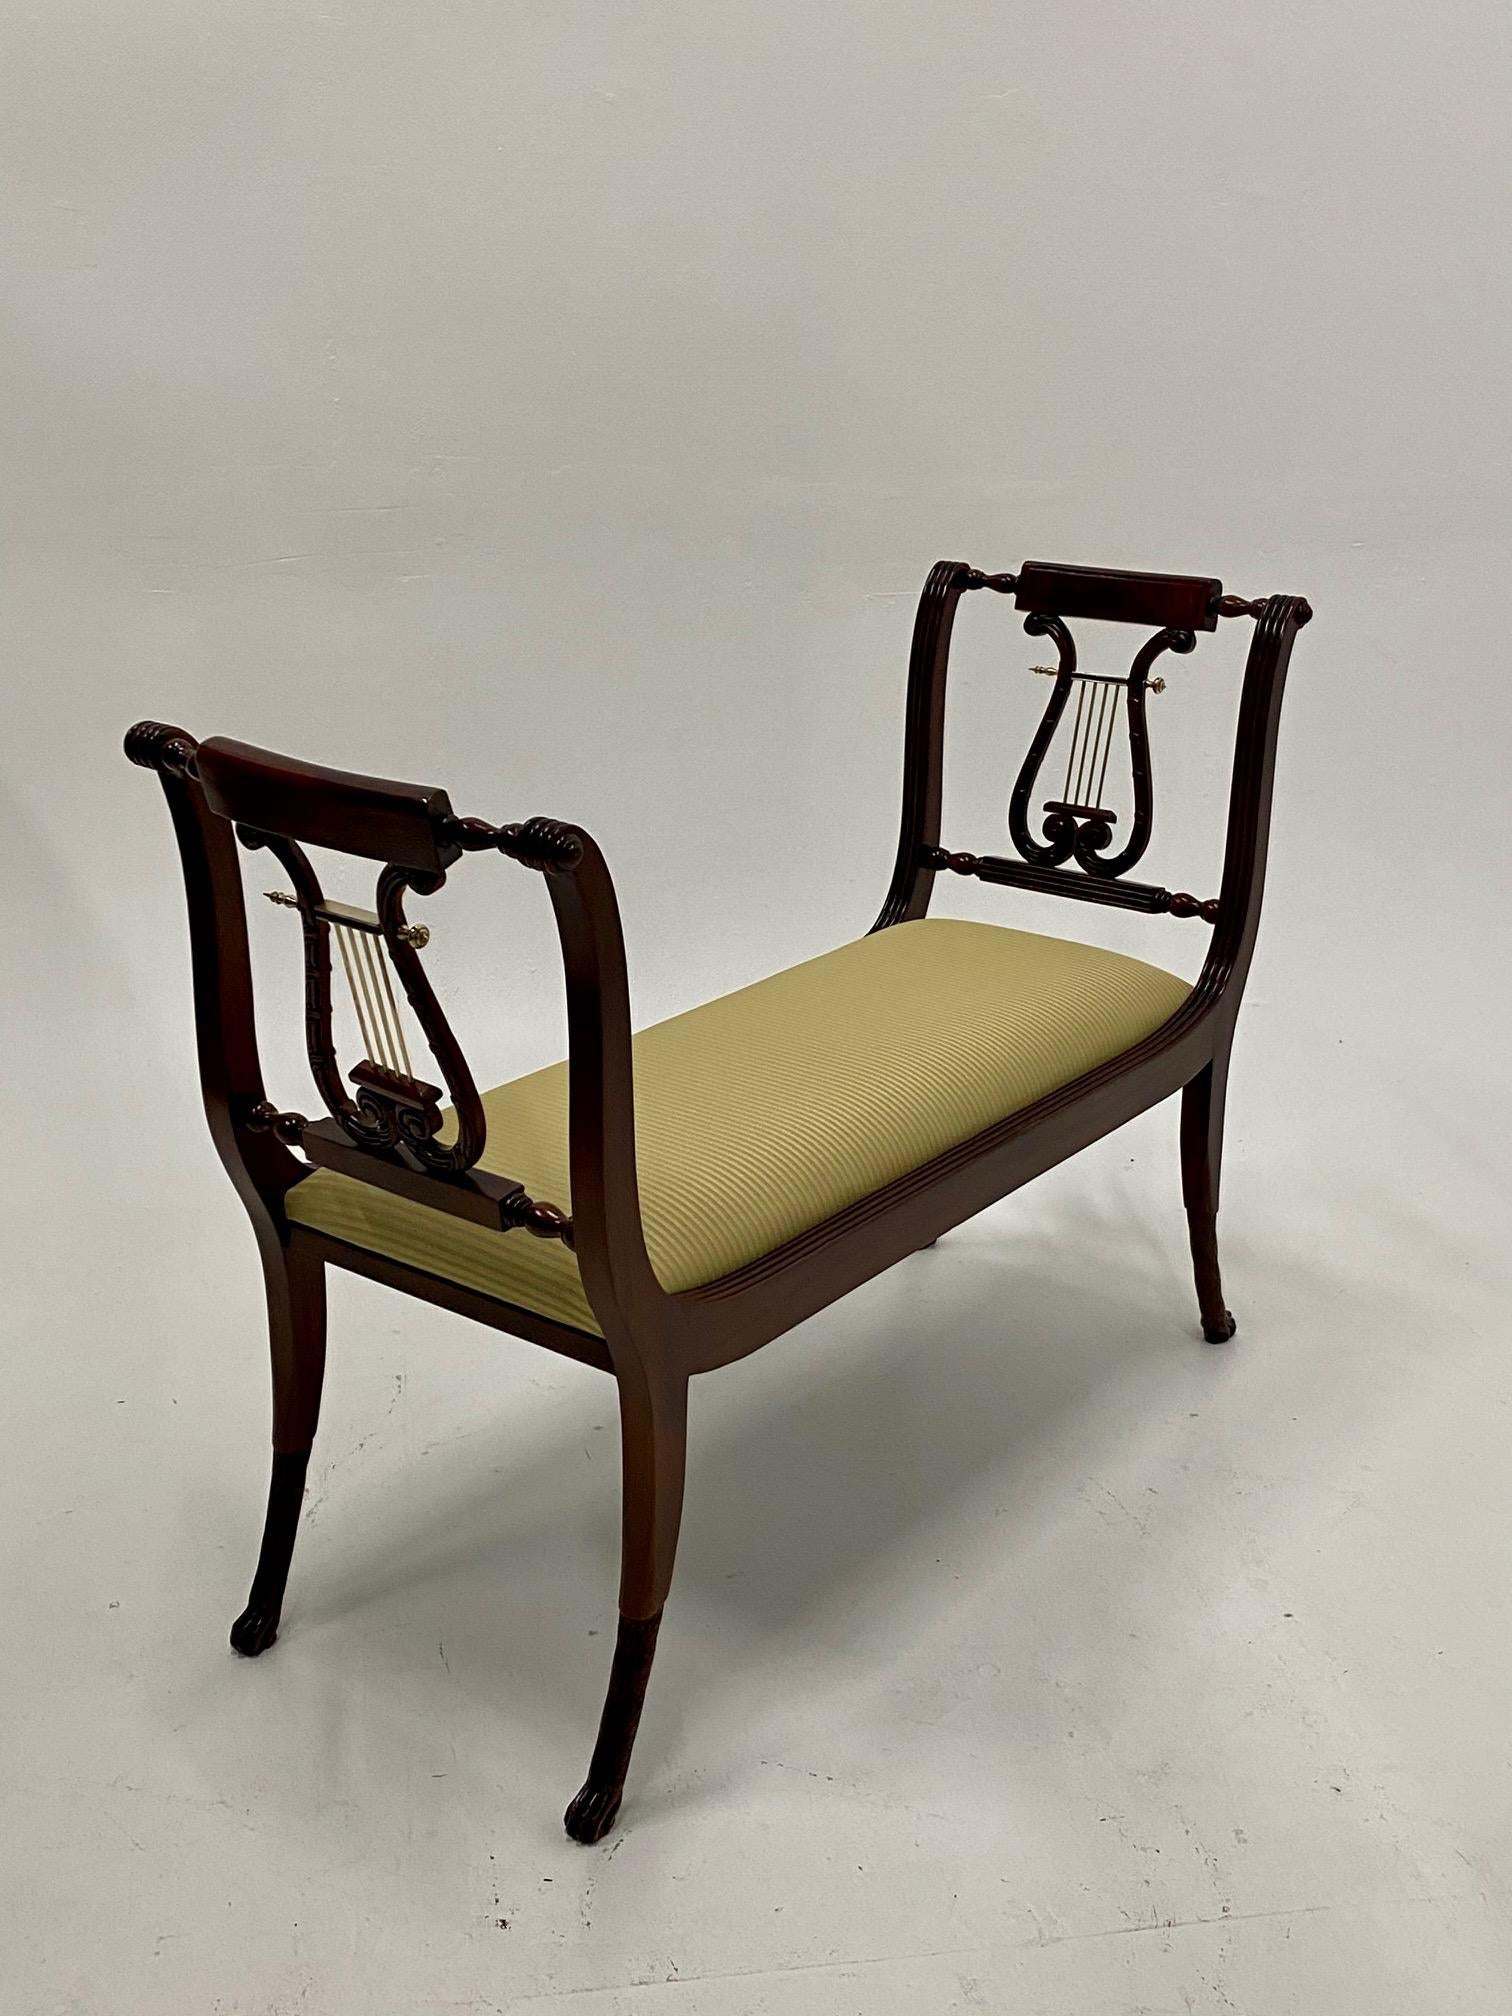 Elegant vintage mahogany and upholstered neoclassical style bench having a marvelous lyre motife, brass accents, and beautiful legs that terminate in animal feet.